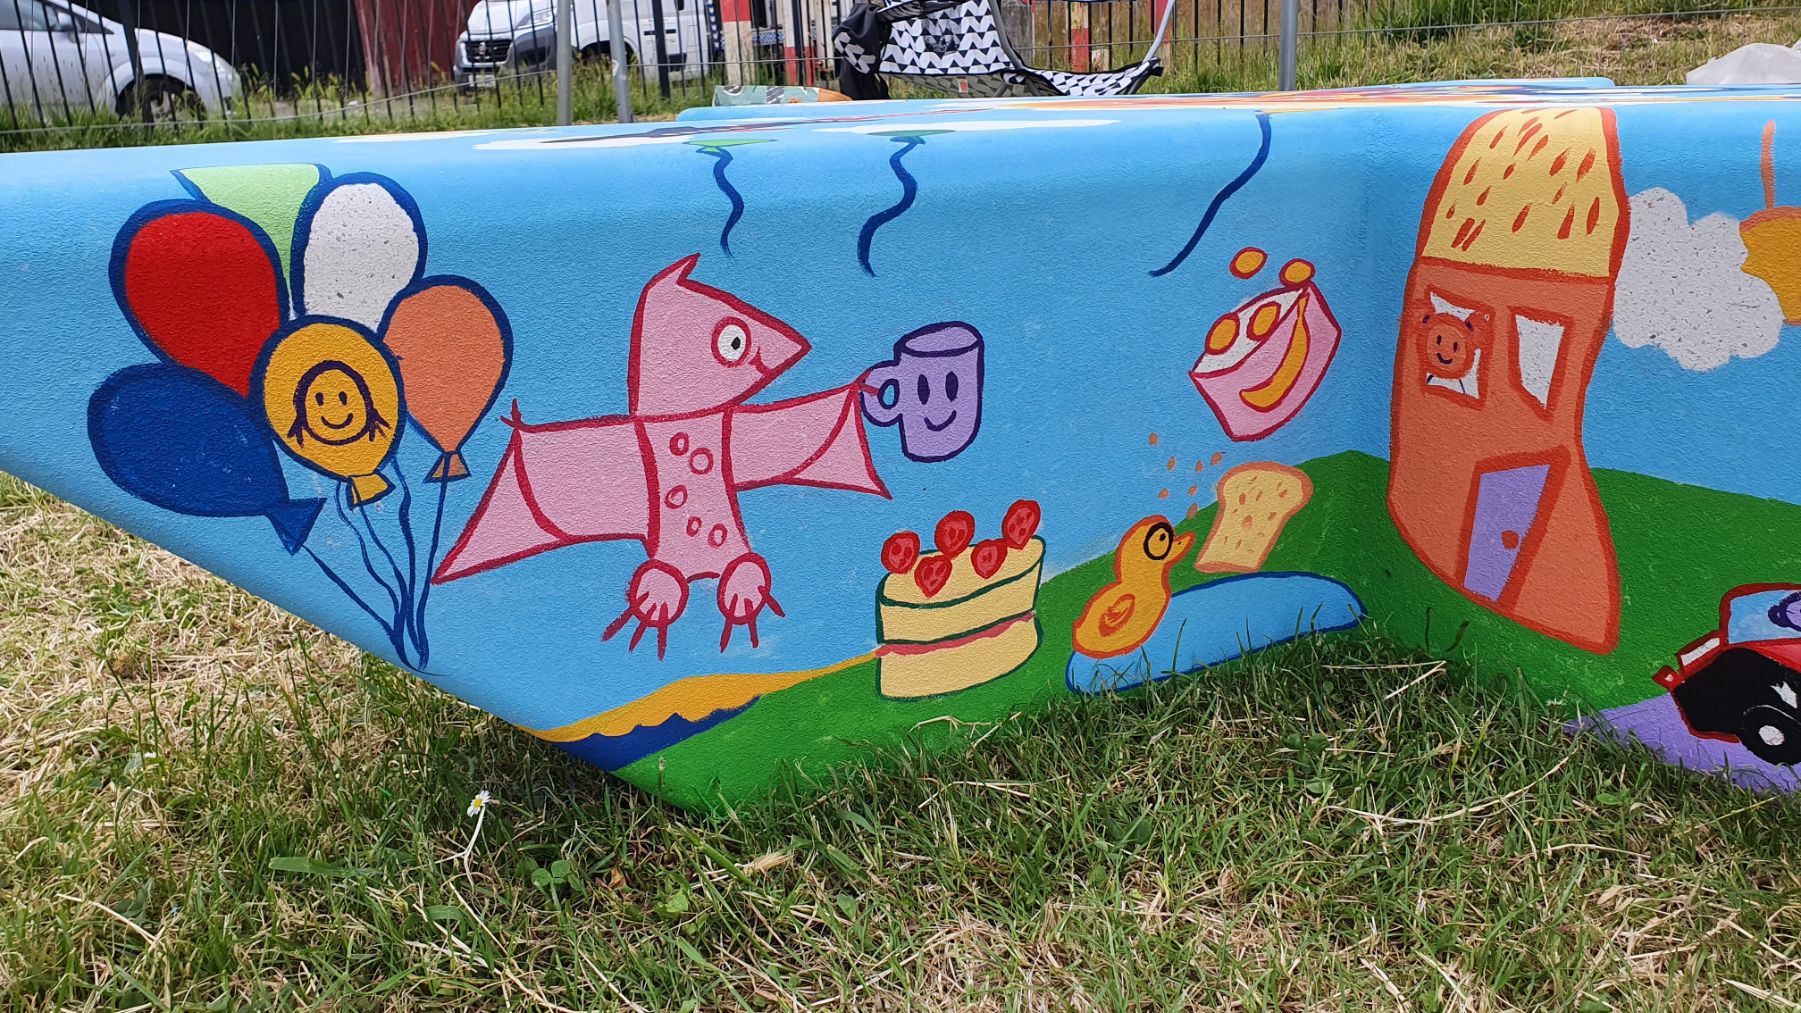 Places and Dreams Bench Design by Alex Edwards Agg